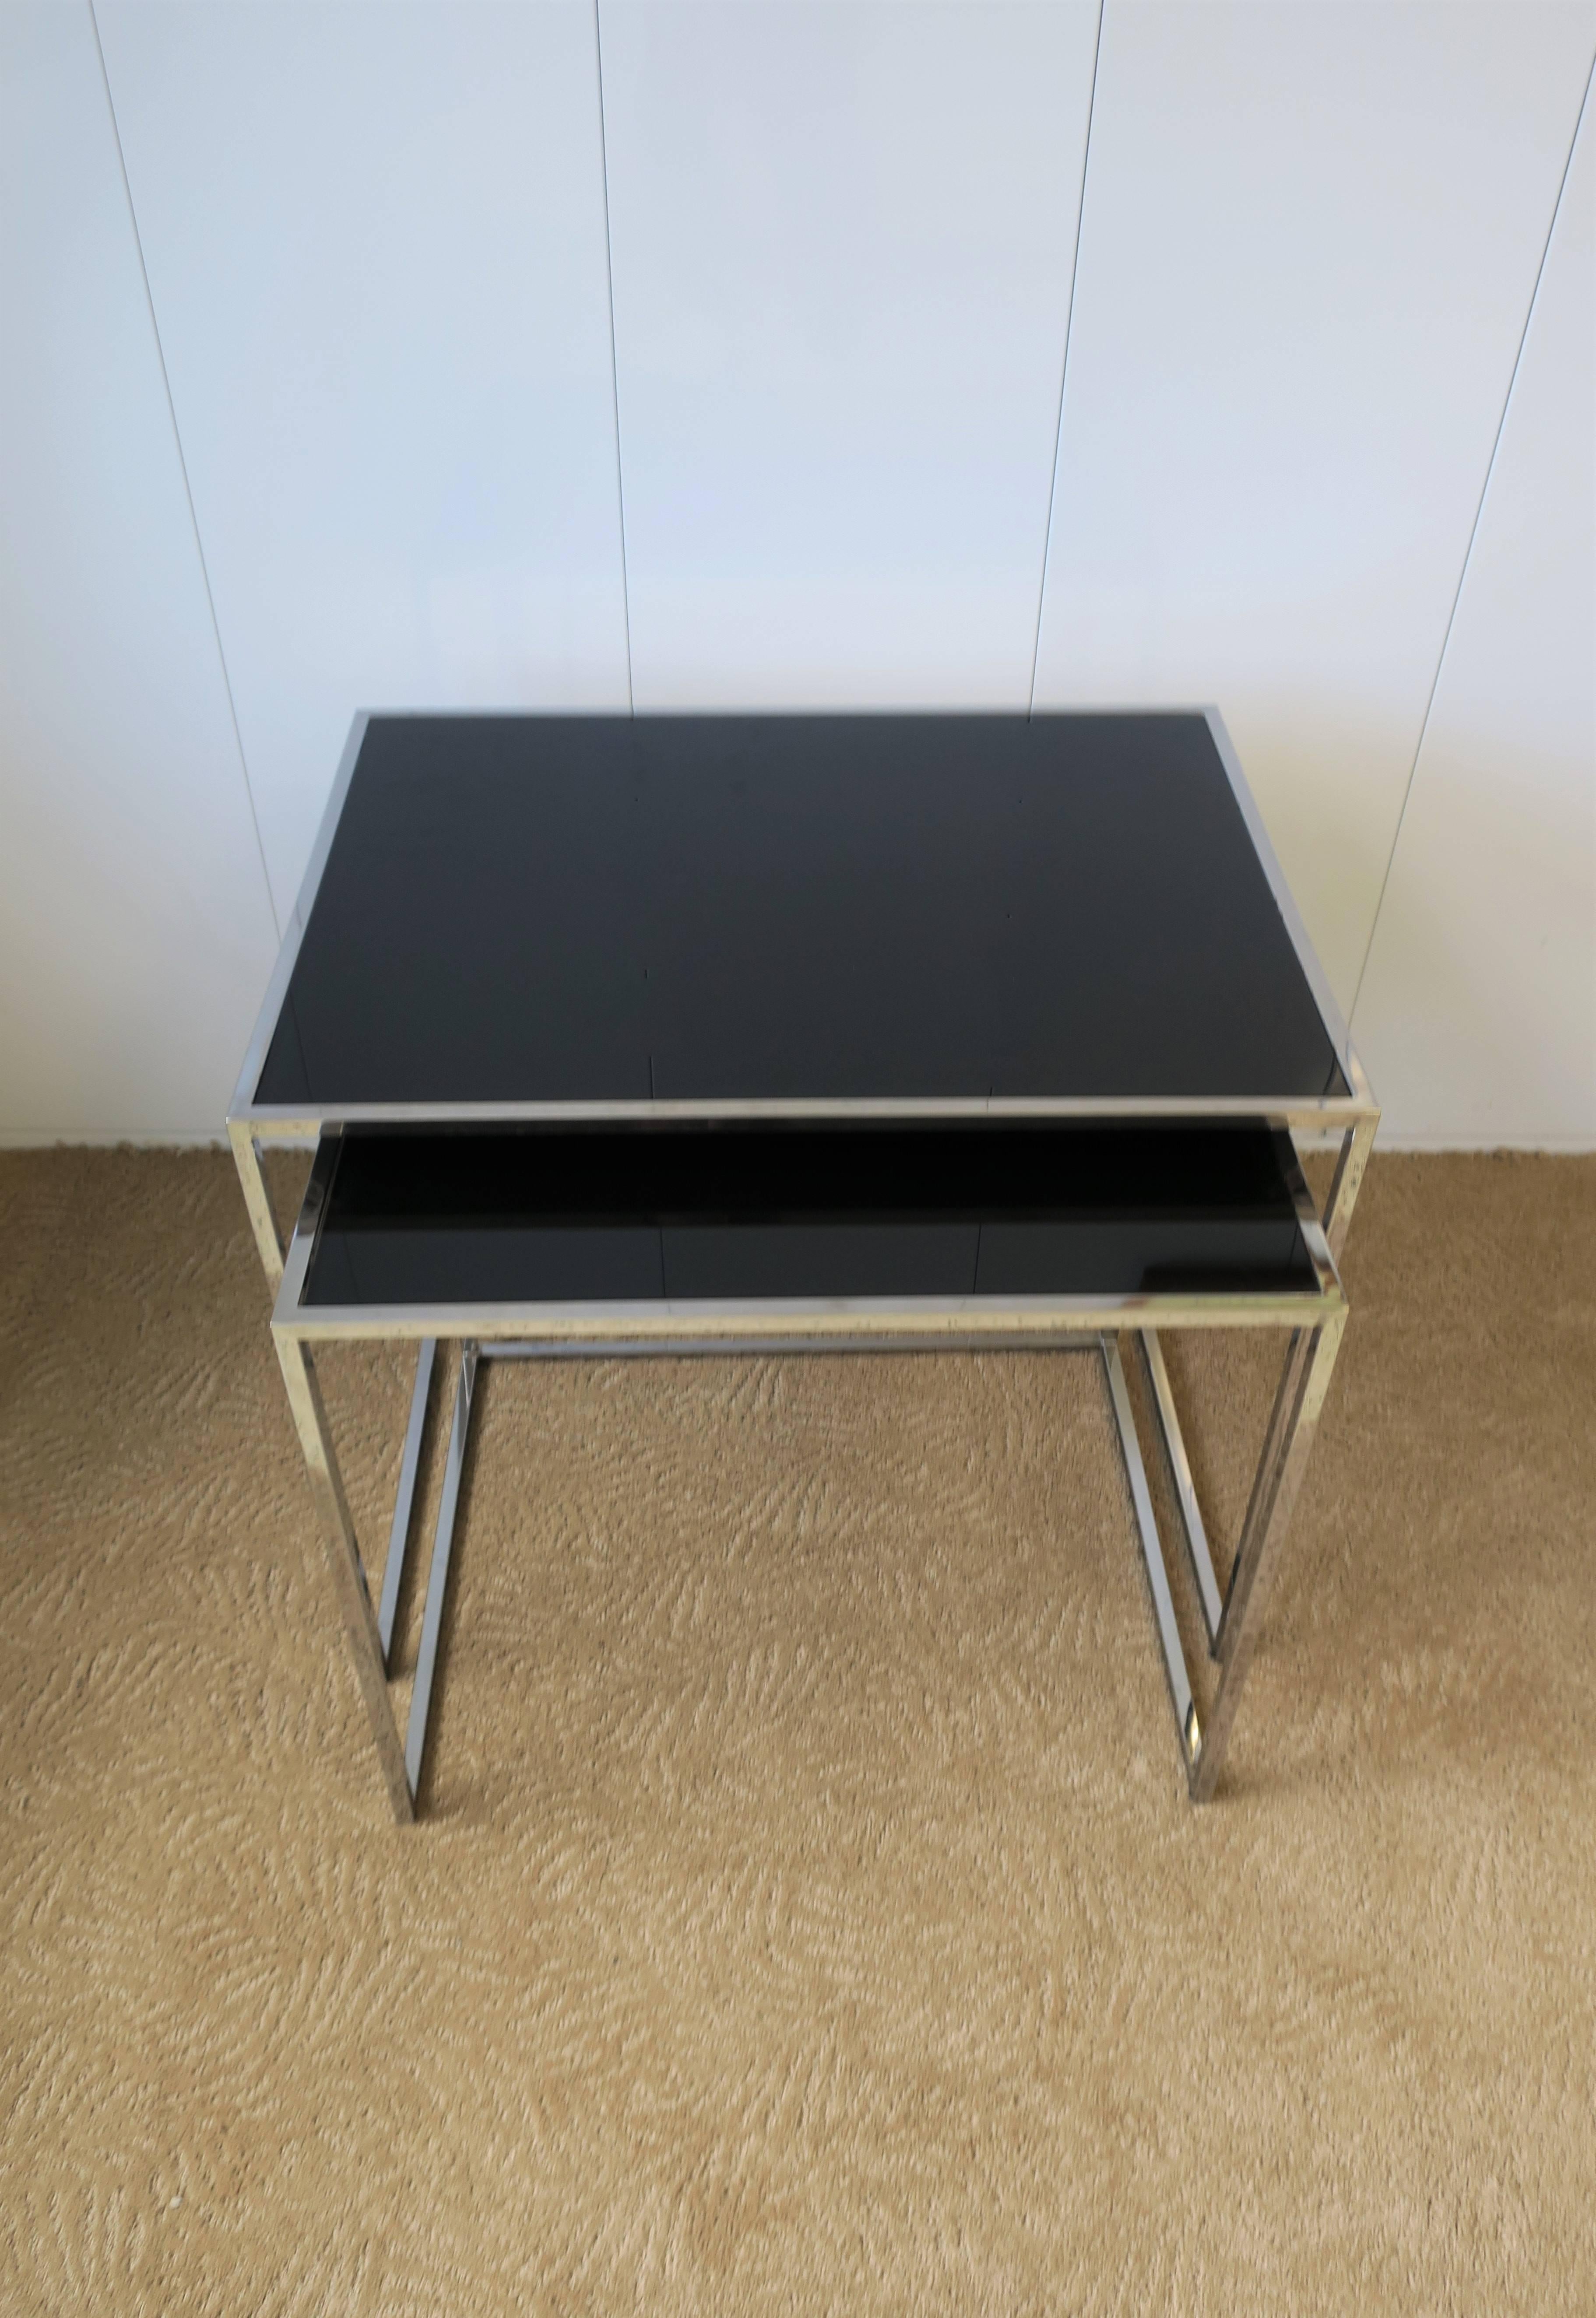 A vintage set of two minimalist chrome and black glass top nesting or end tables. 

Tables measure: 
19.75 in. H x 23.5 in. W x 17.75 in. D
18.25 in. H x 21 in. W x 16.50 in. D

